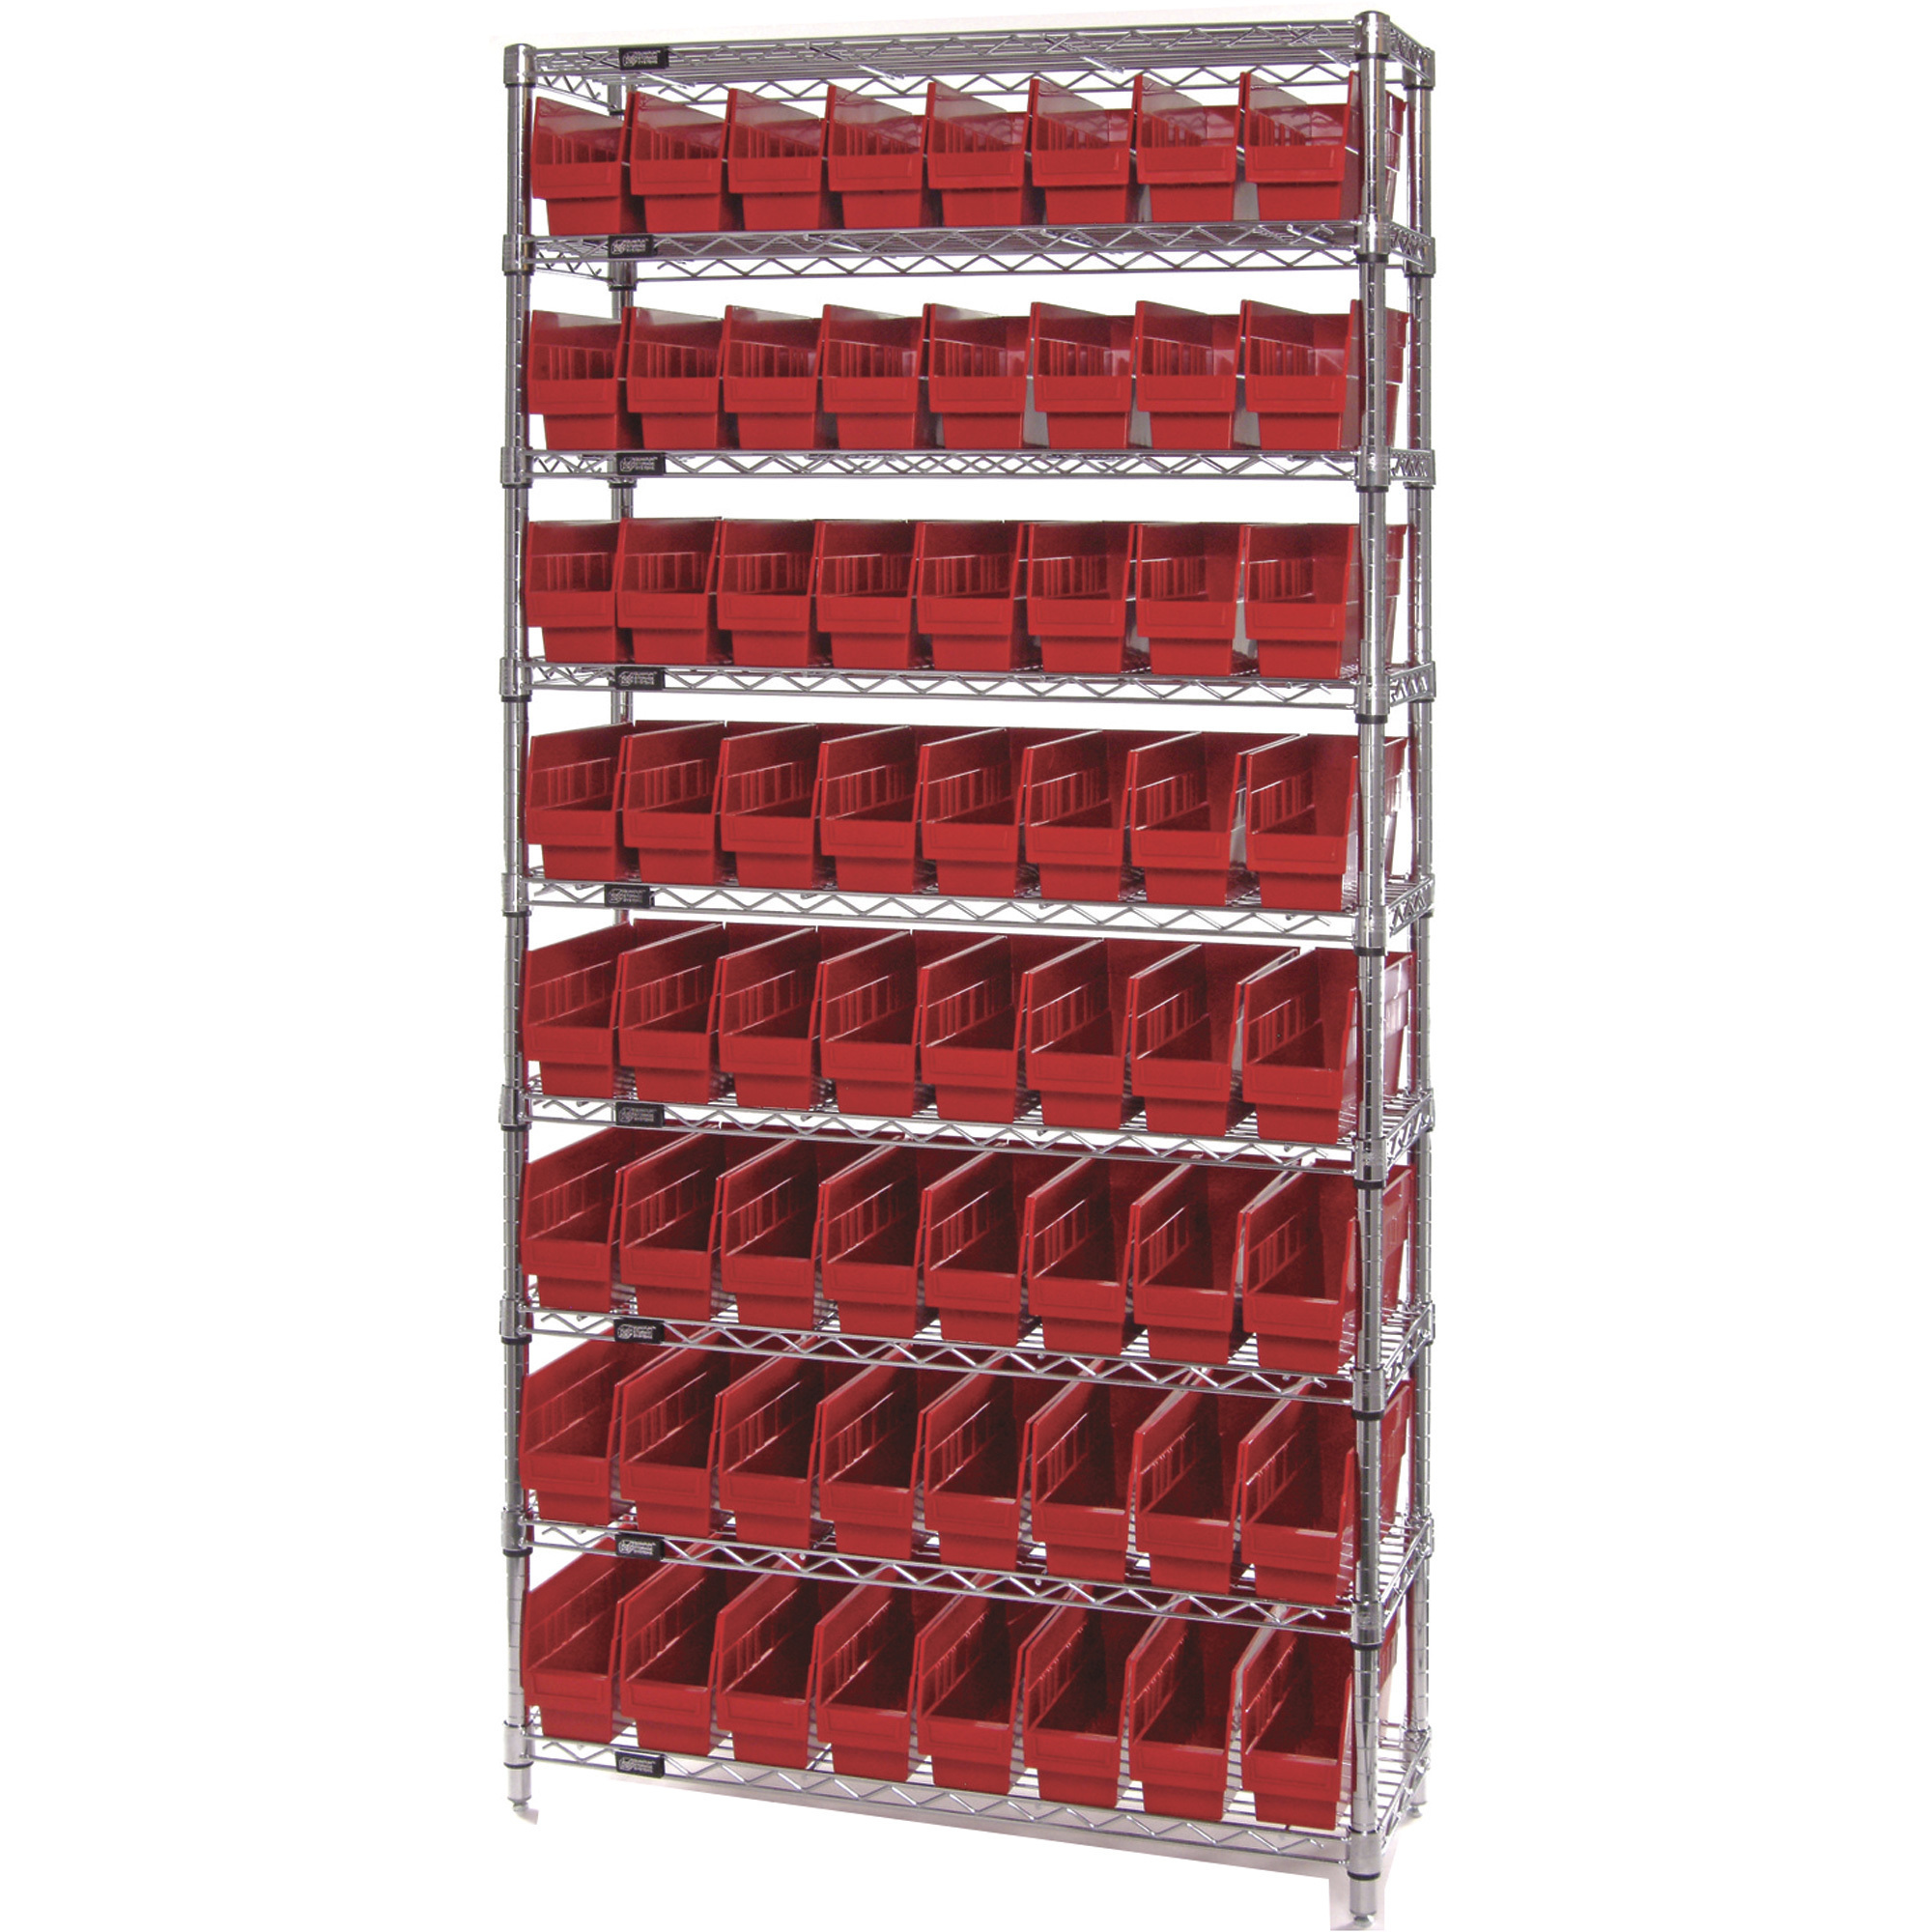 Quantum Storage Single Side Wire Chrome Shelving Unit with 64 Bins — 36Inch W x 12Inch D x 74Inch H, Red, Model WR9-201RD -  Quantum Storage Systems